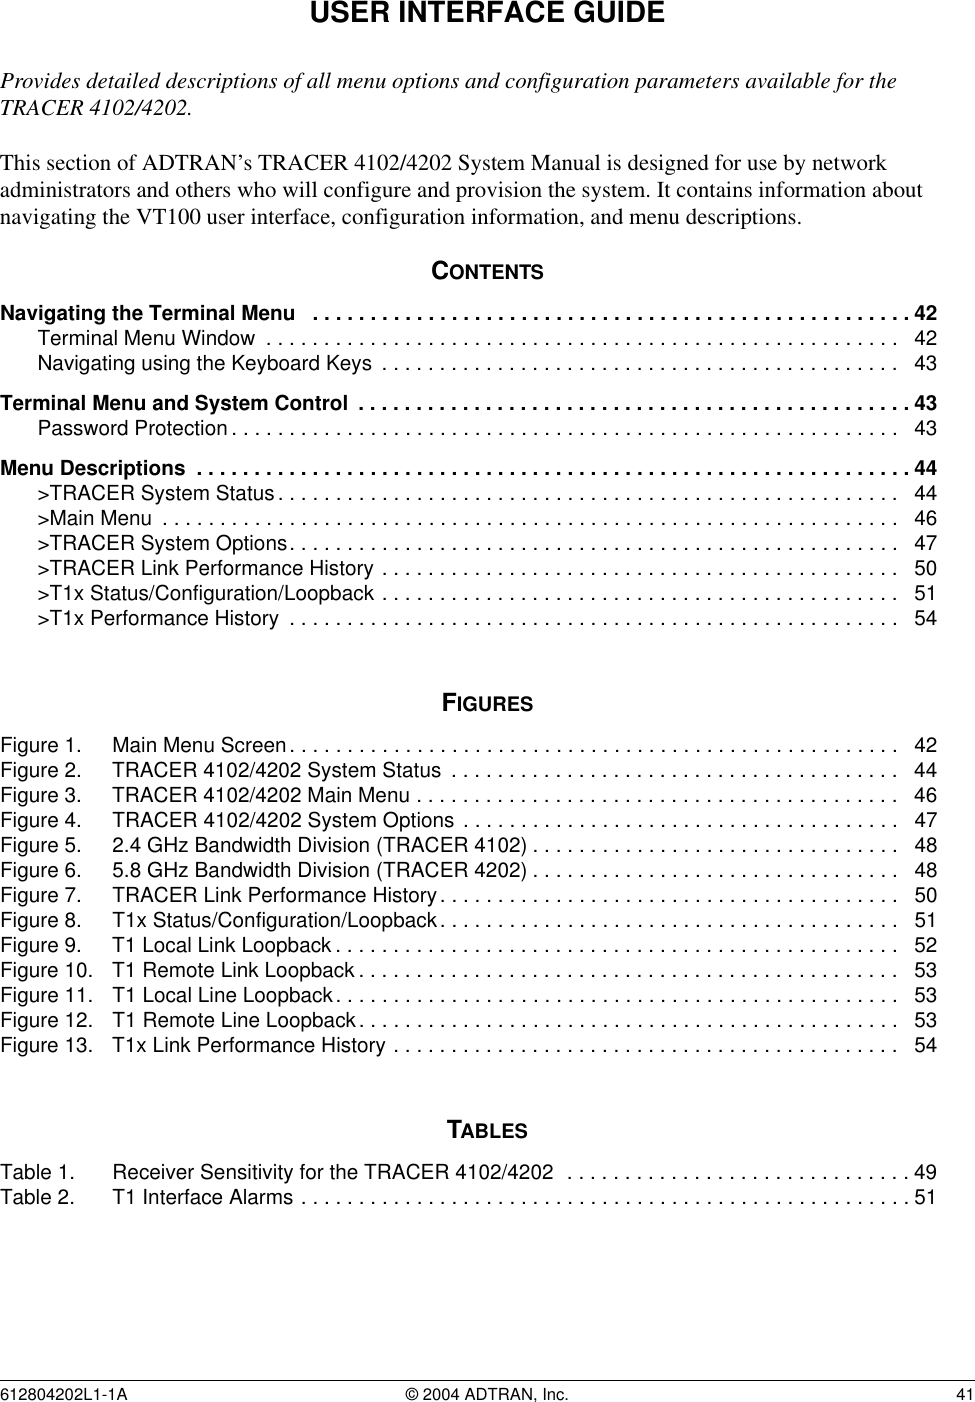 612804202L1-1A © 2004 ADTRAN, Inc.  41USER INTERFACE GUIDEProvides detailed descriptions of all menu options and configuration parameters available for the TRACER 4102/4202.This section of ADTRAN’s TRACER 4102/4202 System Manual is designed for use by network administrators and others who will configure and provision the system. It contains information about navigating the VT100 user interface, configuration information, and menu descriptions.CONTENTSNavigating the Terminal Menu   . . . . . . . . . . . . . . . . . . . . . . . . . . . . . . . . . . . . . . . . . . . . . . . . . . . . 42Terminal Menu Window  . . . . . . . . . . . . . . . . . . . . . . . . . . . . . . . . . . . . . . . . . . . . . . . . . . . . . . .   42Navigating using the Keyboard Keys  . . . . . . . . . . . . . . . . . . . . . . . . . . . . . . . . . . . . . . . . . . . . .   43Terminal Menu and System Control  . . . . . . . . . . . . . . . . . . . . . . . . . . . . . . . . . . . . . . . . . . . . . . . .43Password Protection . . . . . . . . . . . . . . . . . . . . . . . . . . . . . . . . . . . . . . . . . . . . . . . . . . . . . . . . . .   43Menu Descriptions  . . . . . . . . . . . . . . . . . . . . . . . . . . . . . . . . . . . . . . . . . . . . . . . . . . . . . . . . . . . . . . 44&gt;TRACER System Status . . . . . . . . . . . . . . . . . . . . . . . . . . . . . . . . . . . . . . . . . . . . . . . . . . . . . .  44&gt;Main Menu  . . . . . . . . . . . . . . . . . . . . . . . . . . . . . . . . . . . . . . . . . . . . . . . . . . . . . . . . . . . . . . . .   46&gt;TRACER System Options. . . . . . . . . . . . . . . . . . . . . . . . . . . . . . . . . . . . . . . . . . . . . . . . . . . . .  47&gt;TRACER Link Performance History . . . . . . . . . . . . . . . . . . . . . . . . . . . . . . . . . . . . . . . . . . . . .   50&gt;T1x Status/Configuration/Loopback . . . . . . . . . . . . . . . . . . . . . . . . . . . . . . . . . . . . . . . . . . . . .   51&gt;T1x Performance History  . . . . . . . . . . . . . . . . . . . . . . . . . . . . . . . . . . . . . . . . . . . . . . . . . . . . .   54FIGURESFigure 1. Main Menu Screen. . . . . . . . . . . . . . . . . . . . . . . . . . . . . . . . . . . . . . . . . . . . . . . . . . . . .   42Figure 2. TRACER 4102/4202 System Status  . . . . . . . . . . . . . . . . . . . . . . . . . . . . . . . . . . . . . . .   44Figure 3. TRACER 4102/4202 Main Menu . . . . . . . . . . . . . . . . . . . . . . . . . . . . . . . . . . . . . . . . . .   46Figure 4. TRACER 4102/4202 System Options . . . . . . . . . . . . . . . . . . . . . . . . . . . . . . . . . . . . . .   47Figure 5. 2.4 GHz Bandwidth Division (TRACER 4102) . . . . . . . . . . . . . . . . . . . . . . . . . . . . . . . .   48Figure 6. 5.8 GHz Bandwidth Division (TRACER 4202) . . . . . . . . . . . . . . . . . . . . . . . . . . . . . . . .   48Figure 7. TRACER Link Performance History. . . . . . . . . . . . . . . . . . . . . . . . . . . . . . . . . . . . . . . .   50Figure 8. T1x Status/Configuration/Loopback. . . . . . . . . . . . . . . . . . . . . . . . . . . . . . . . . . . . . . . .   51Figure 9. T1 Local Link Loopback . . . . . . . . . . . . . . . . . . . . . . . . . . . . . . . . . . . . . . . . . . . . . . . . .  52Figure 10. T1 Remote Link Loopback . . . . . . . . . . . . . . . . . . . . . . . . . . . . . . . . . . . . . . . . . . . . . . .   53Figure 11. T1 Local Line Loopback. . . . . . . . . . . . . . . . . . . . . . . . . . . . . . . . . . . . . . . . . . . . . . . . .   53Figure 12. T1 Remote Line Loopback. . . . . . . . . . . . . . . . . . . . . . . . . . . . . . . . . . . . . . . . . . . . . . .   53Figure 13. T1x Link Performance History . . . . . . . . . . . . . . . . . . . . . . . . . . . . . . . . . . . . . . . . . . . .   54TABLESTable 1. Receiver Sensitivity for the TRACER 4102/4202  . . . . . . . . . . . . . . . . . . . . . . . . . . . . . . 49Table 2. T1 Interface Alarms . . . . . . . . . . . . . . . . . . . . . . . . . . . . . . . . . . . . . . . . . . . . . . . . . . . . . 51